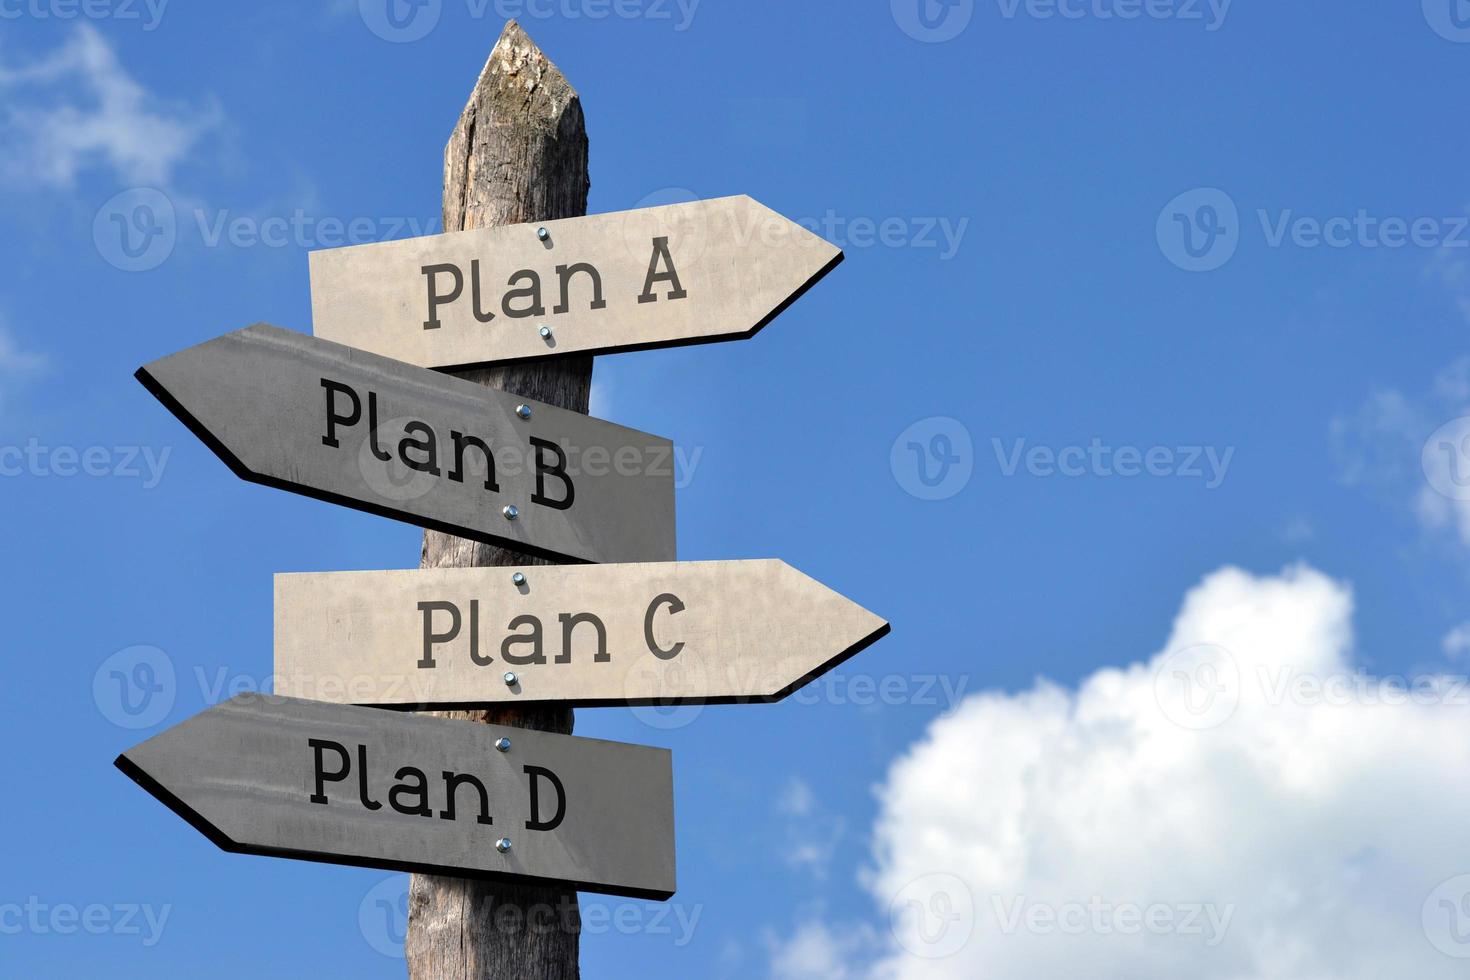 Plan A, Plan B, Plan C, Plan D - Wooden Signpost with Four Arrows, Sky with Clouds photo